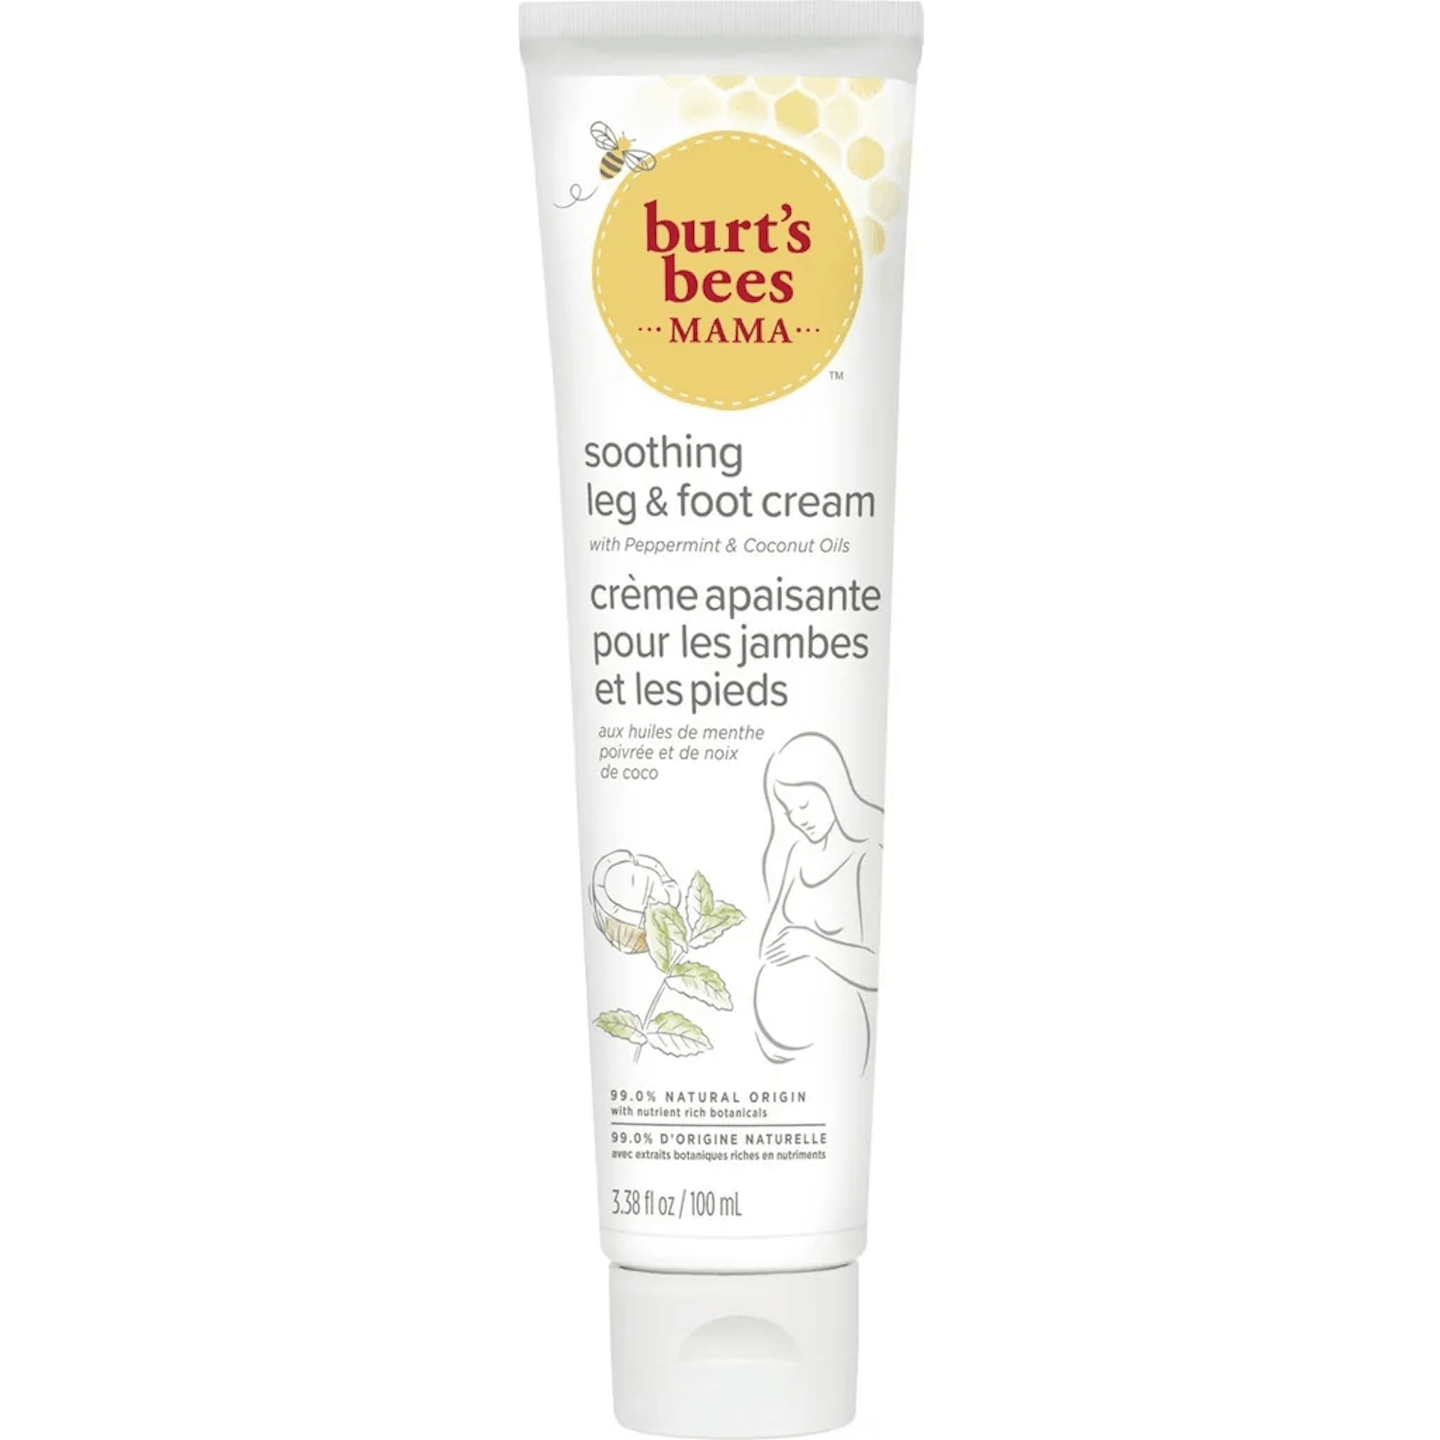 Burt's Bees Mama Soothing Leg & Foot Cream, for immediate soothing relief, with coconut and peppermint oil , 100ml